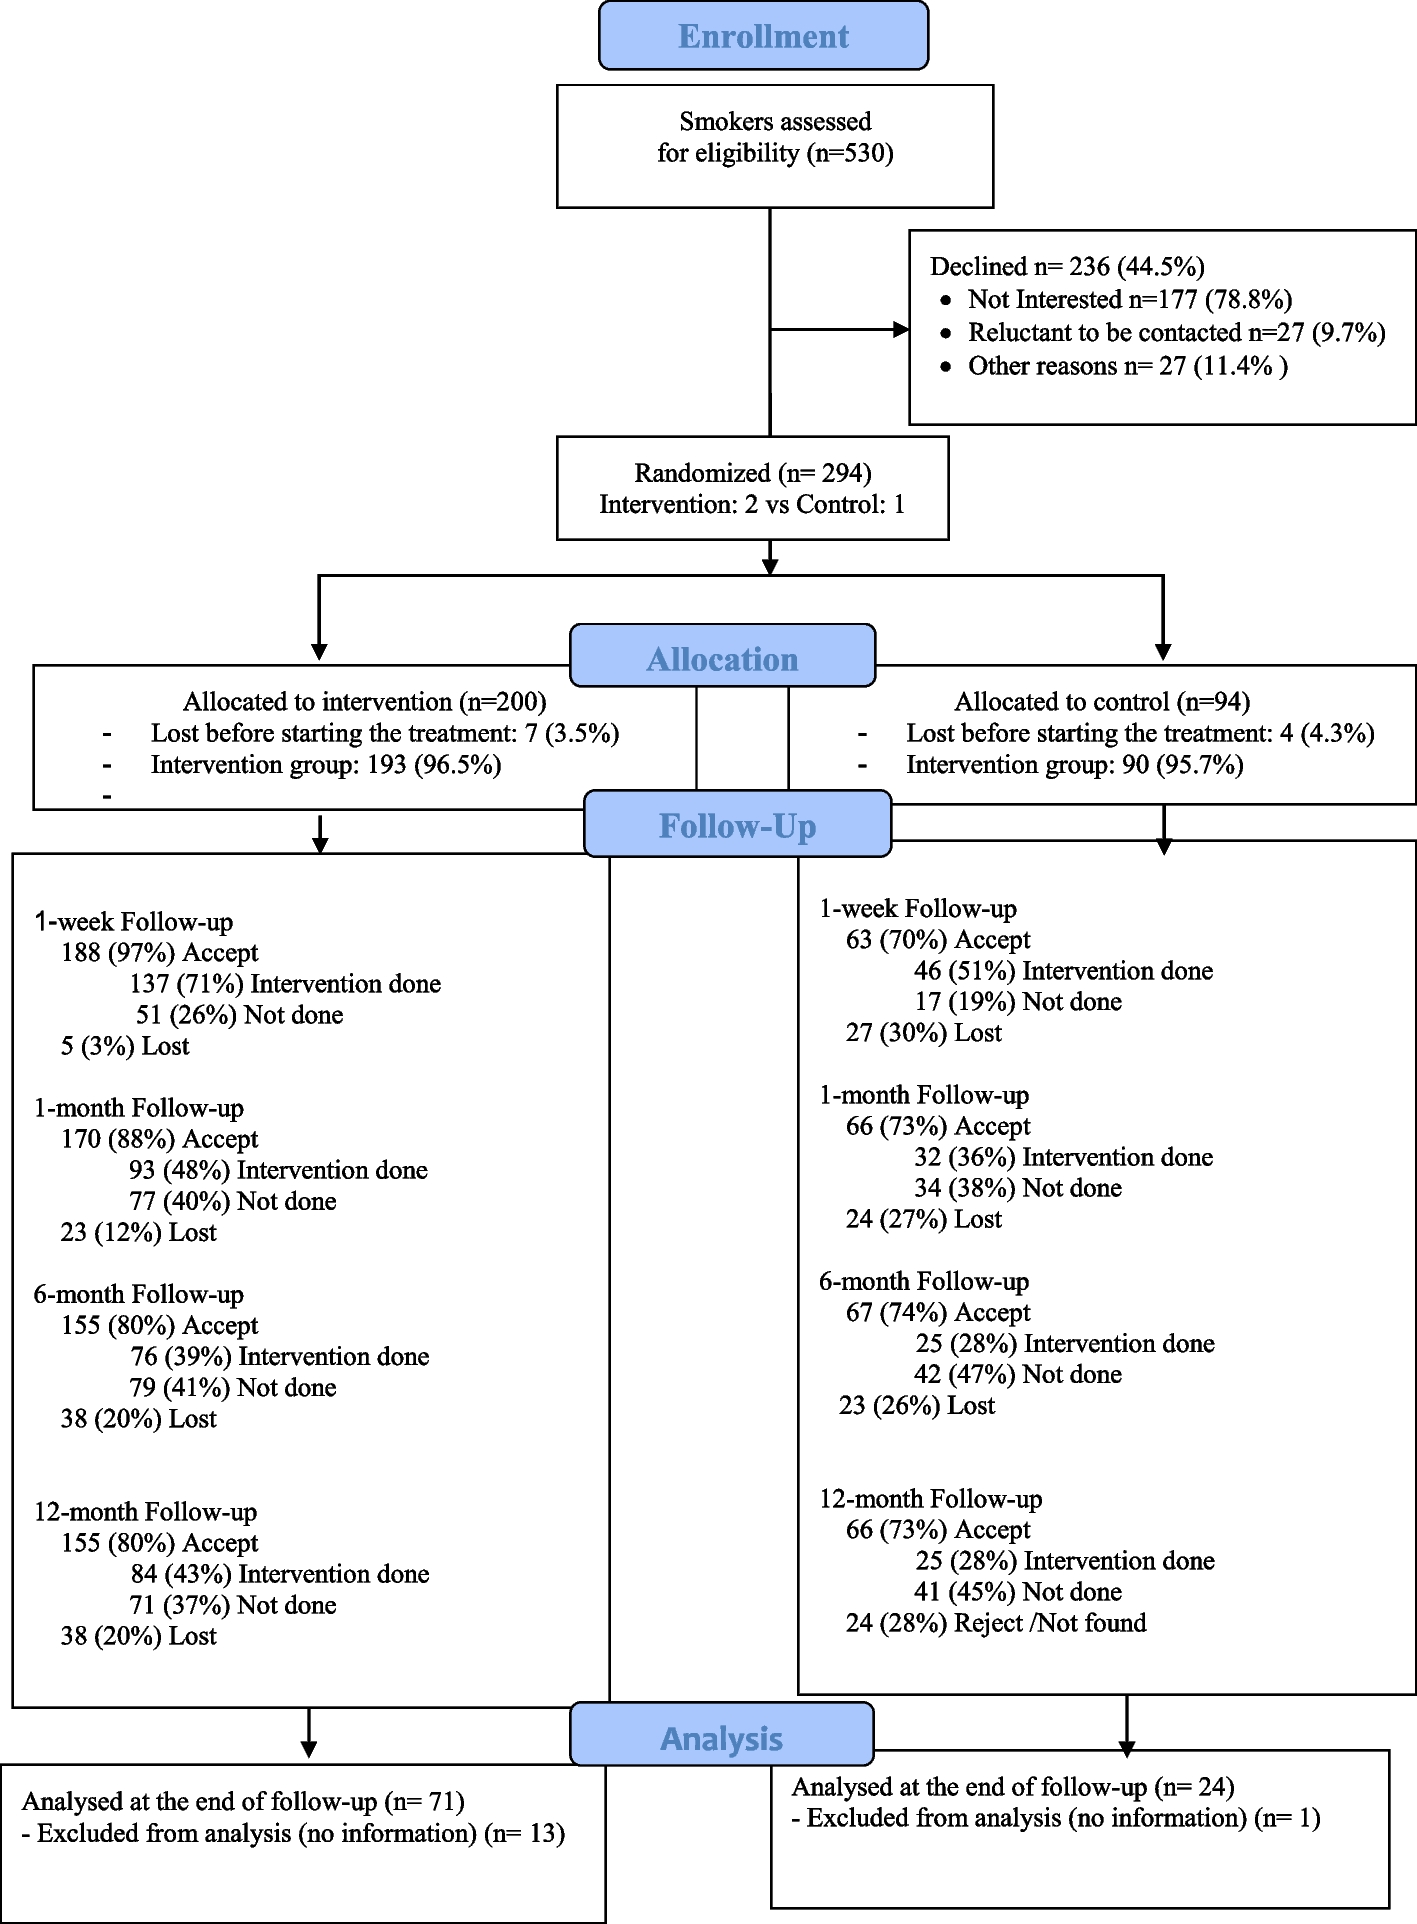 Effectiveness of a Post-discharge Phone-Based Smoking Cessation Intervention for Patients with Severe Mental Health Disorders: The 061 Quitmental Randomized Controlled Clinical Trial